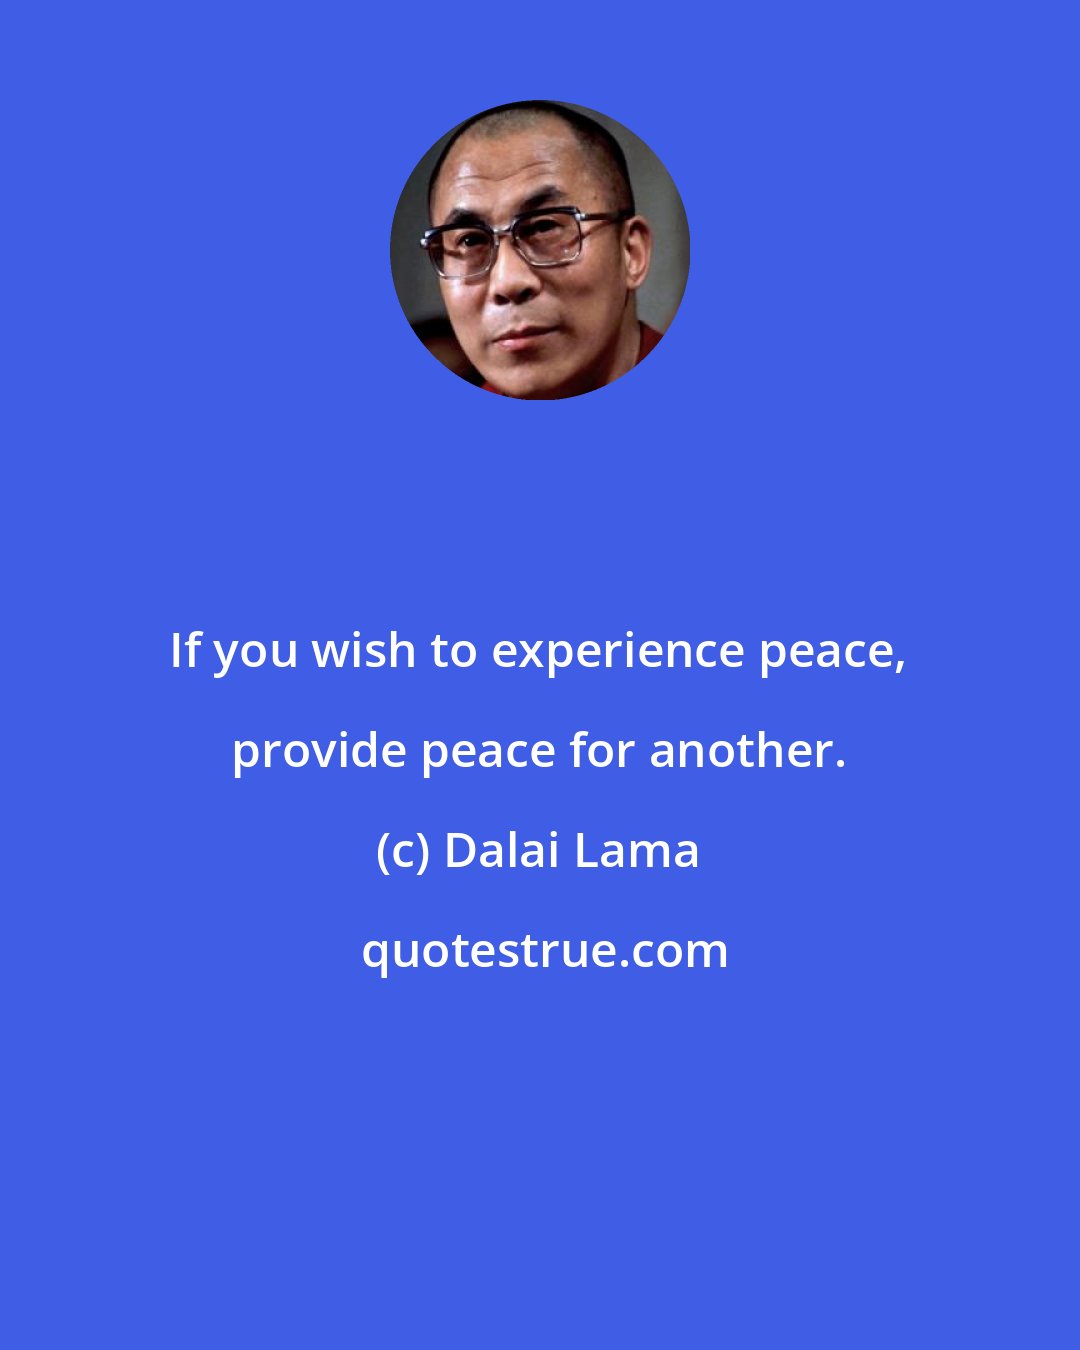 Dalai Lama: If you wish to experience peace, provide peace for another.